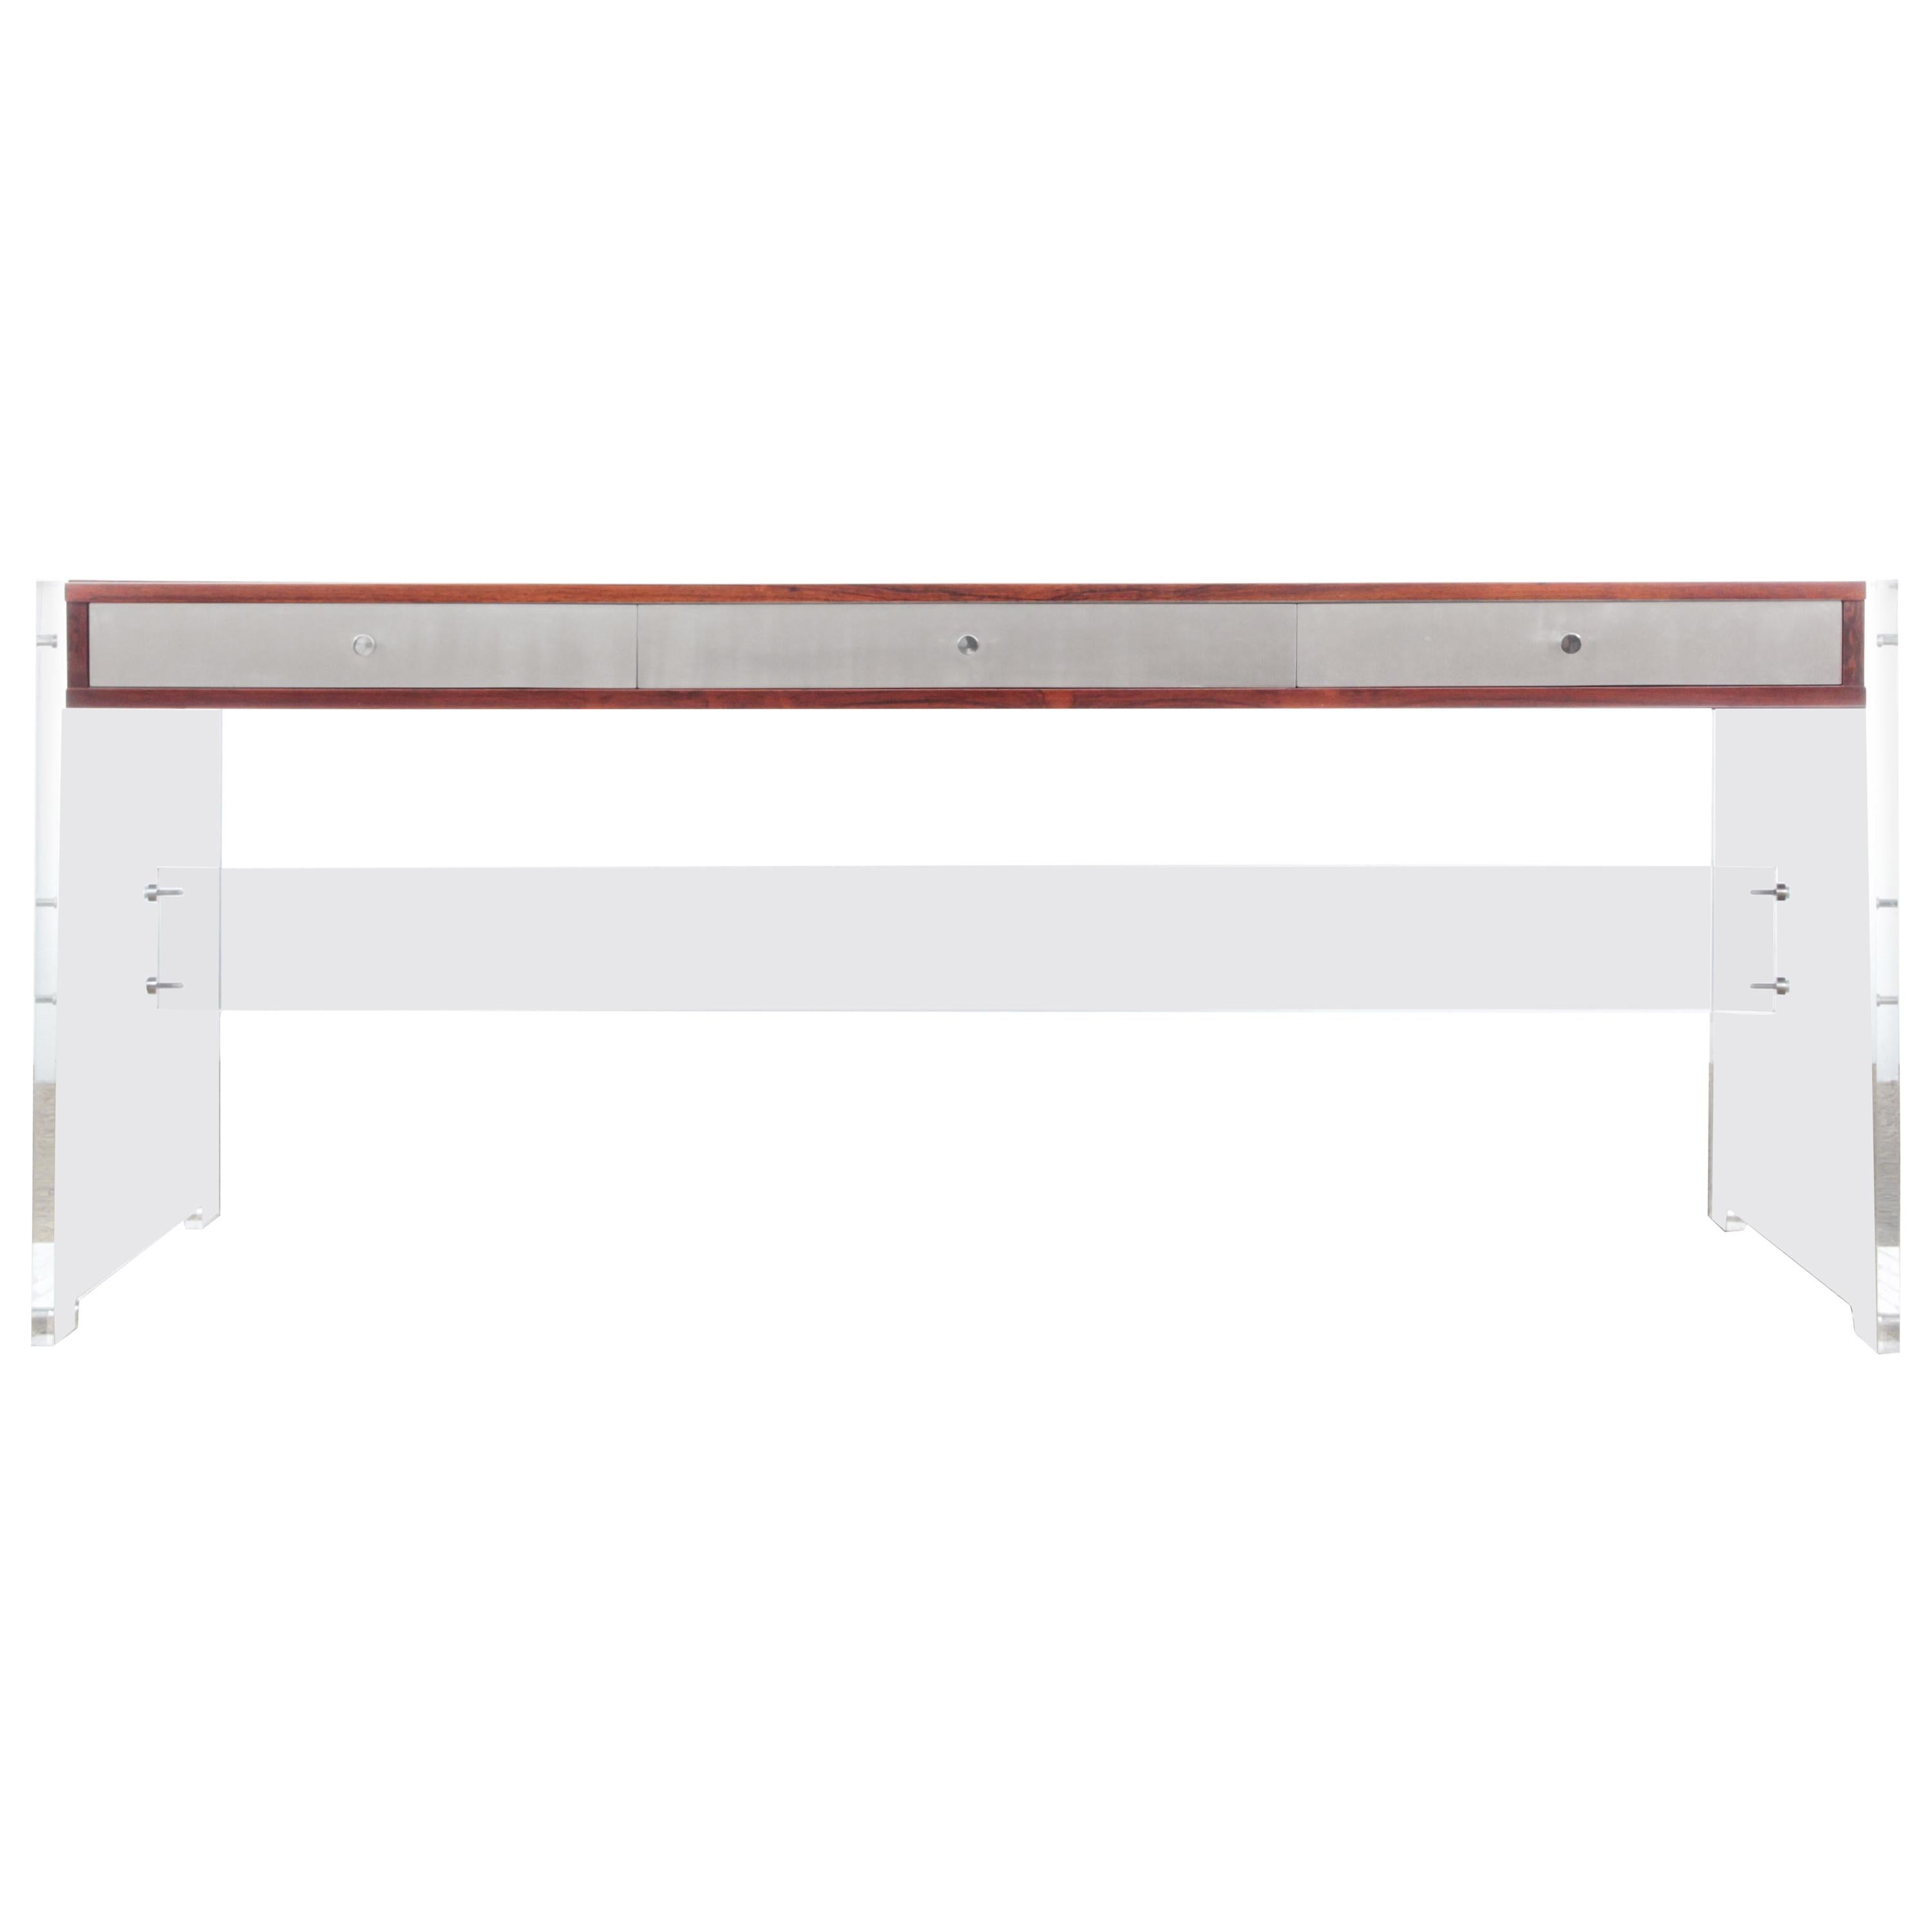 Rosewood desk with plexiglass structure. The desk has 3 drawers with aluminum fronts and chromed steel handles. Thanks to its acrylic structure, top seems to float. Good condition, light color difference with a desk set. Design by Poul Nørreklit in